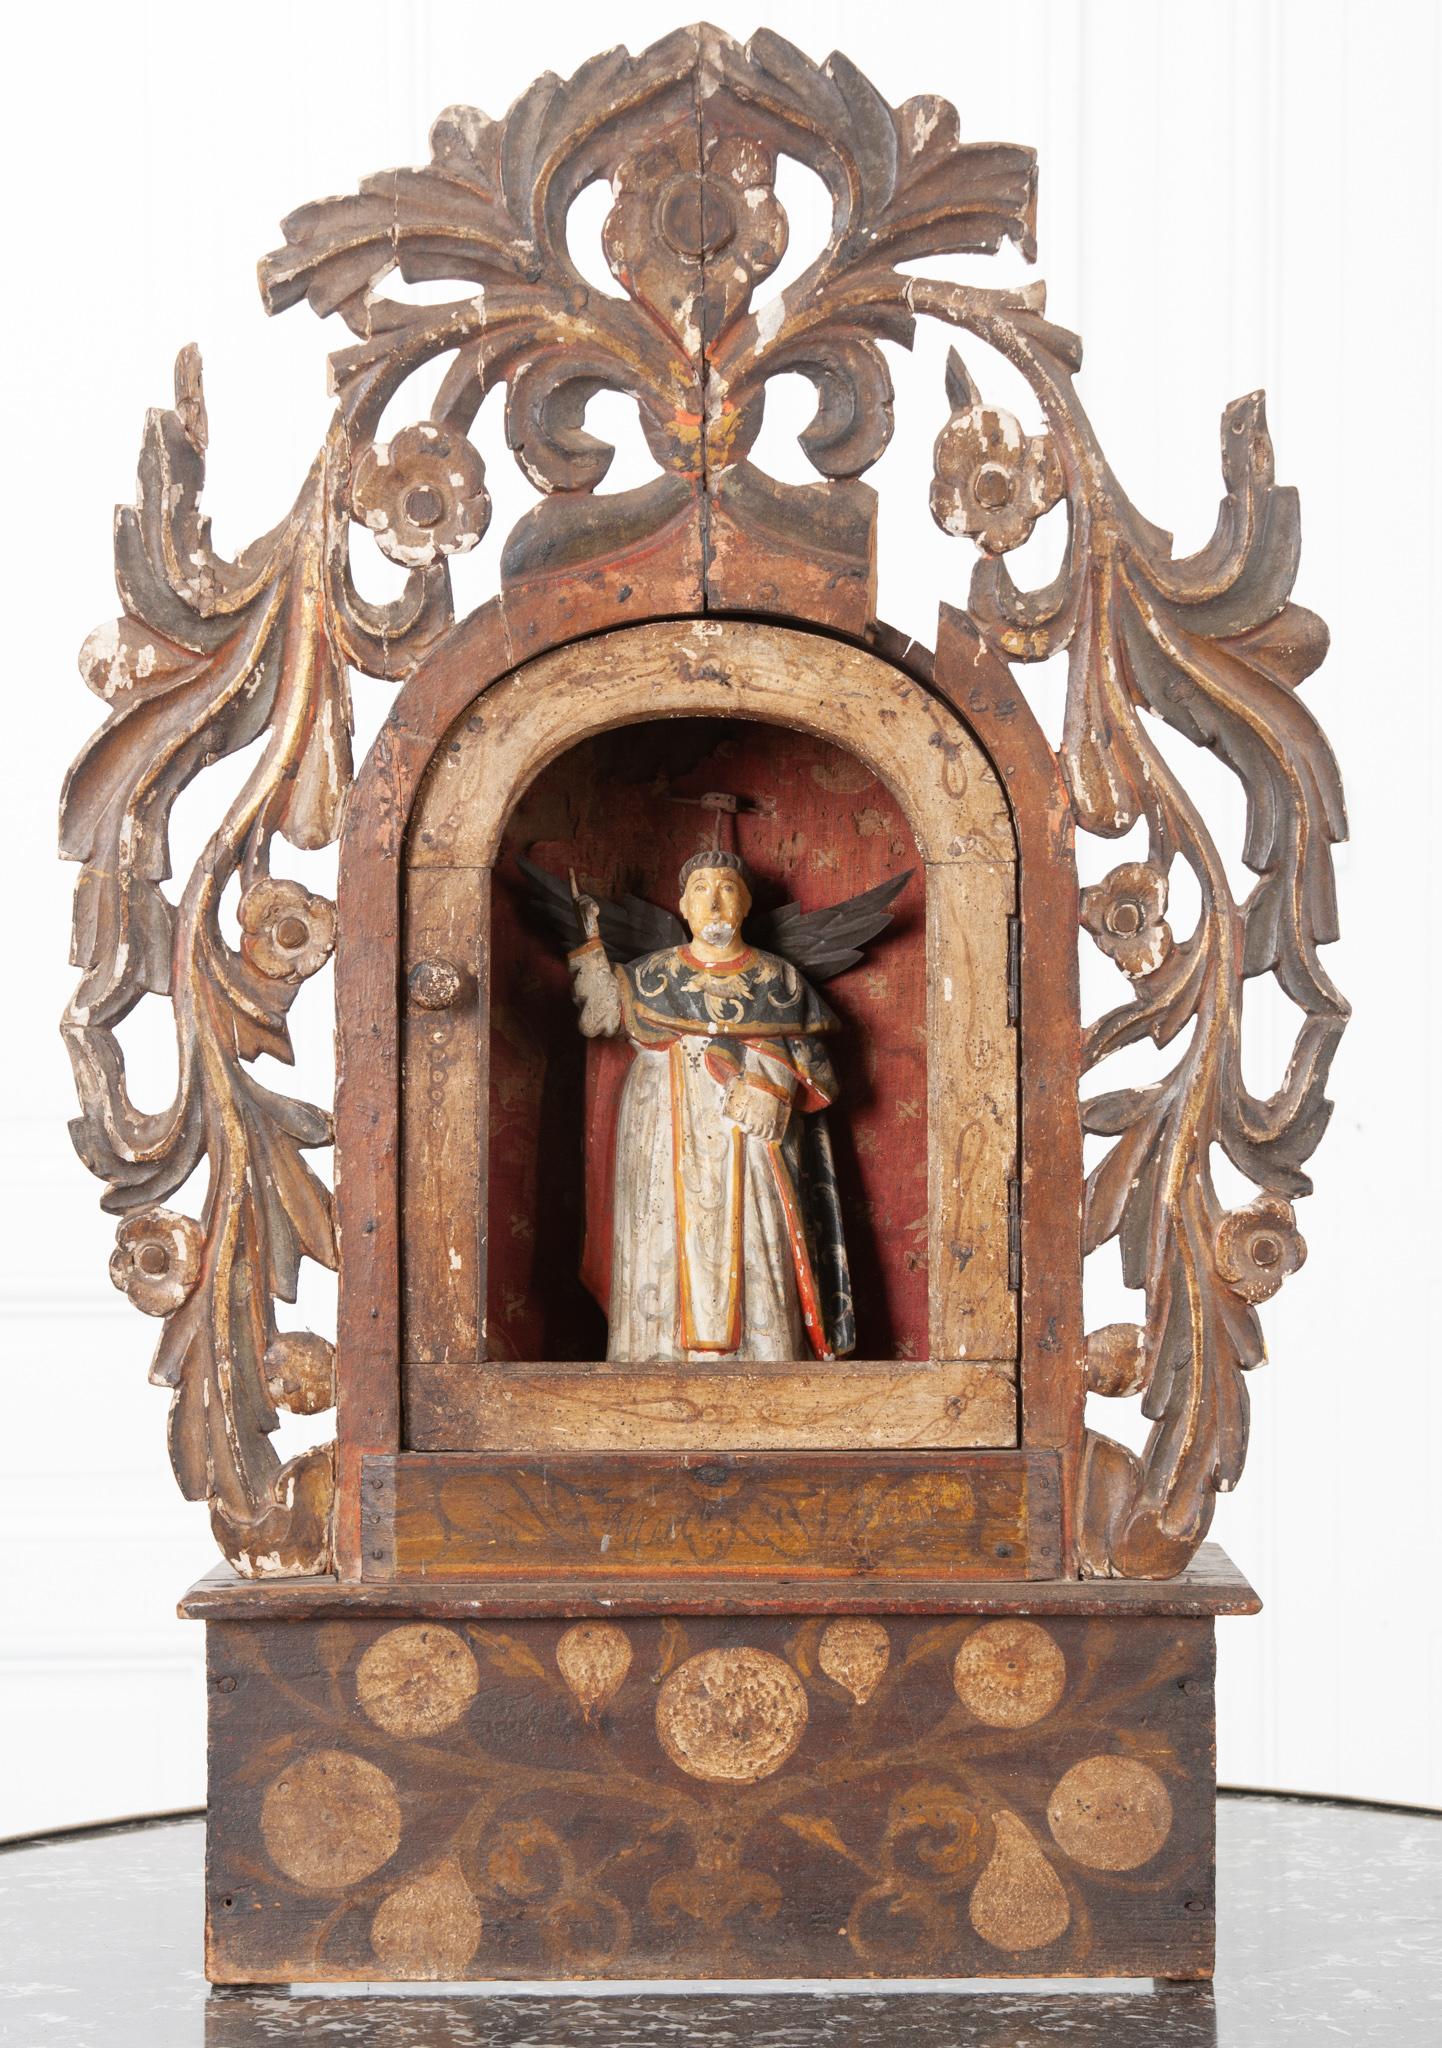 This early 19th century Italian altar is made of worn painted wood and worn fabric details. This is a highly decorative altar for the unknown Catholic saint carved in the center; designated by his upward pointing finger, wings, and attachment where